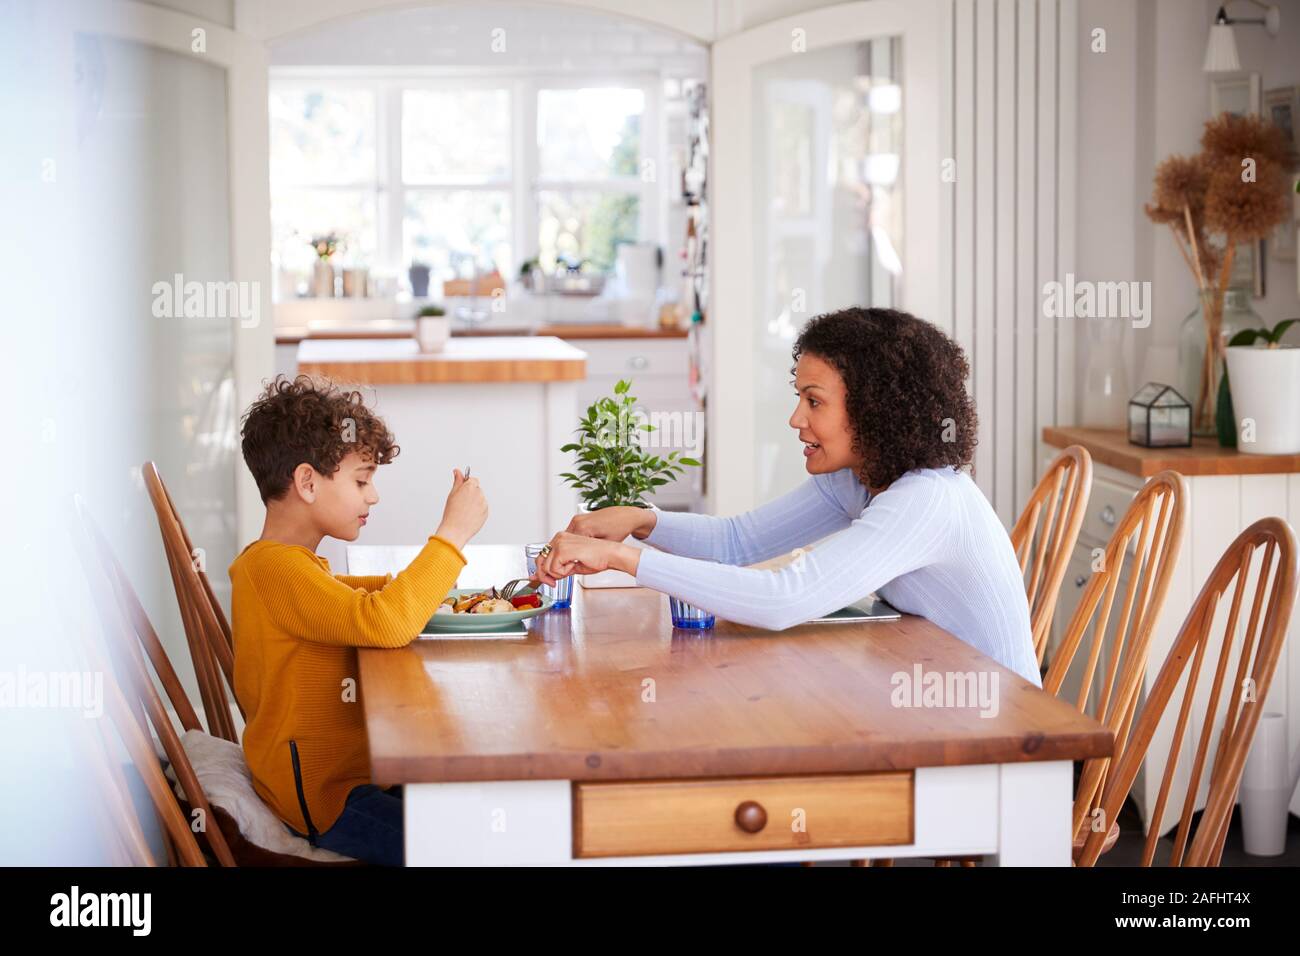 Single Mother Sitting At Table Eating Meal With Son In Kitchen At Home Stock Photo